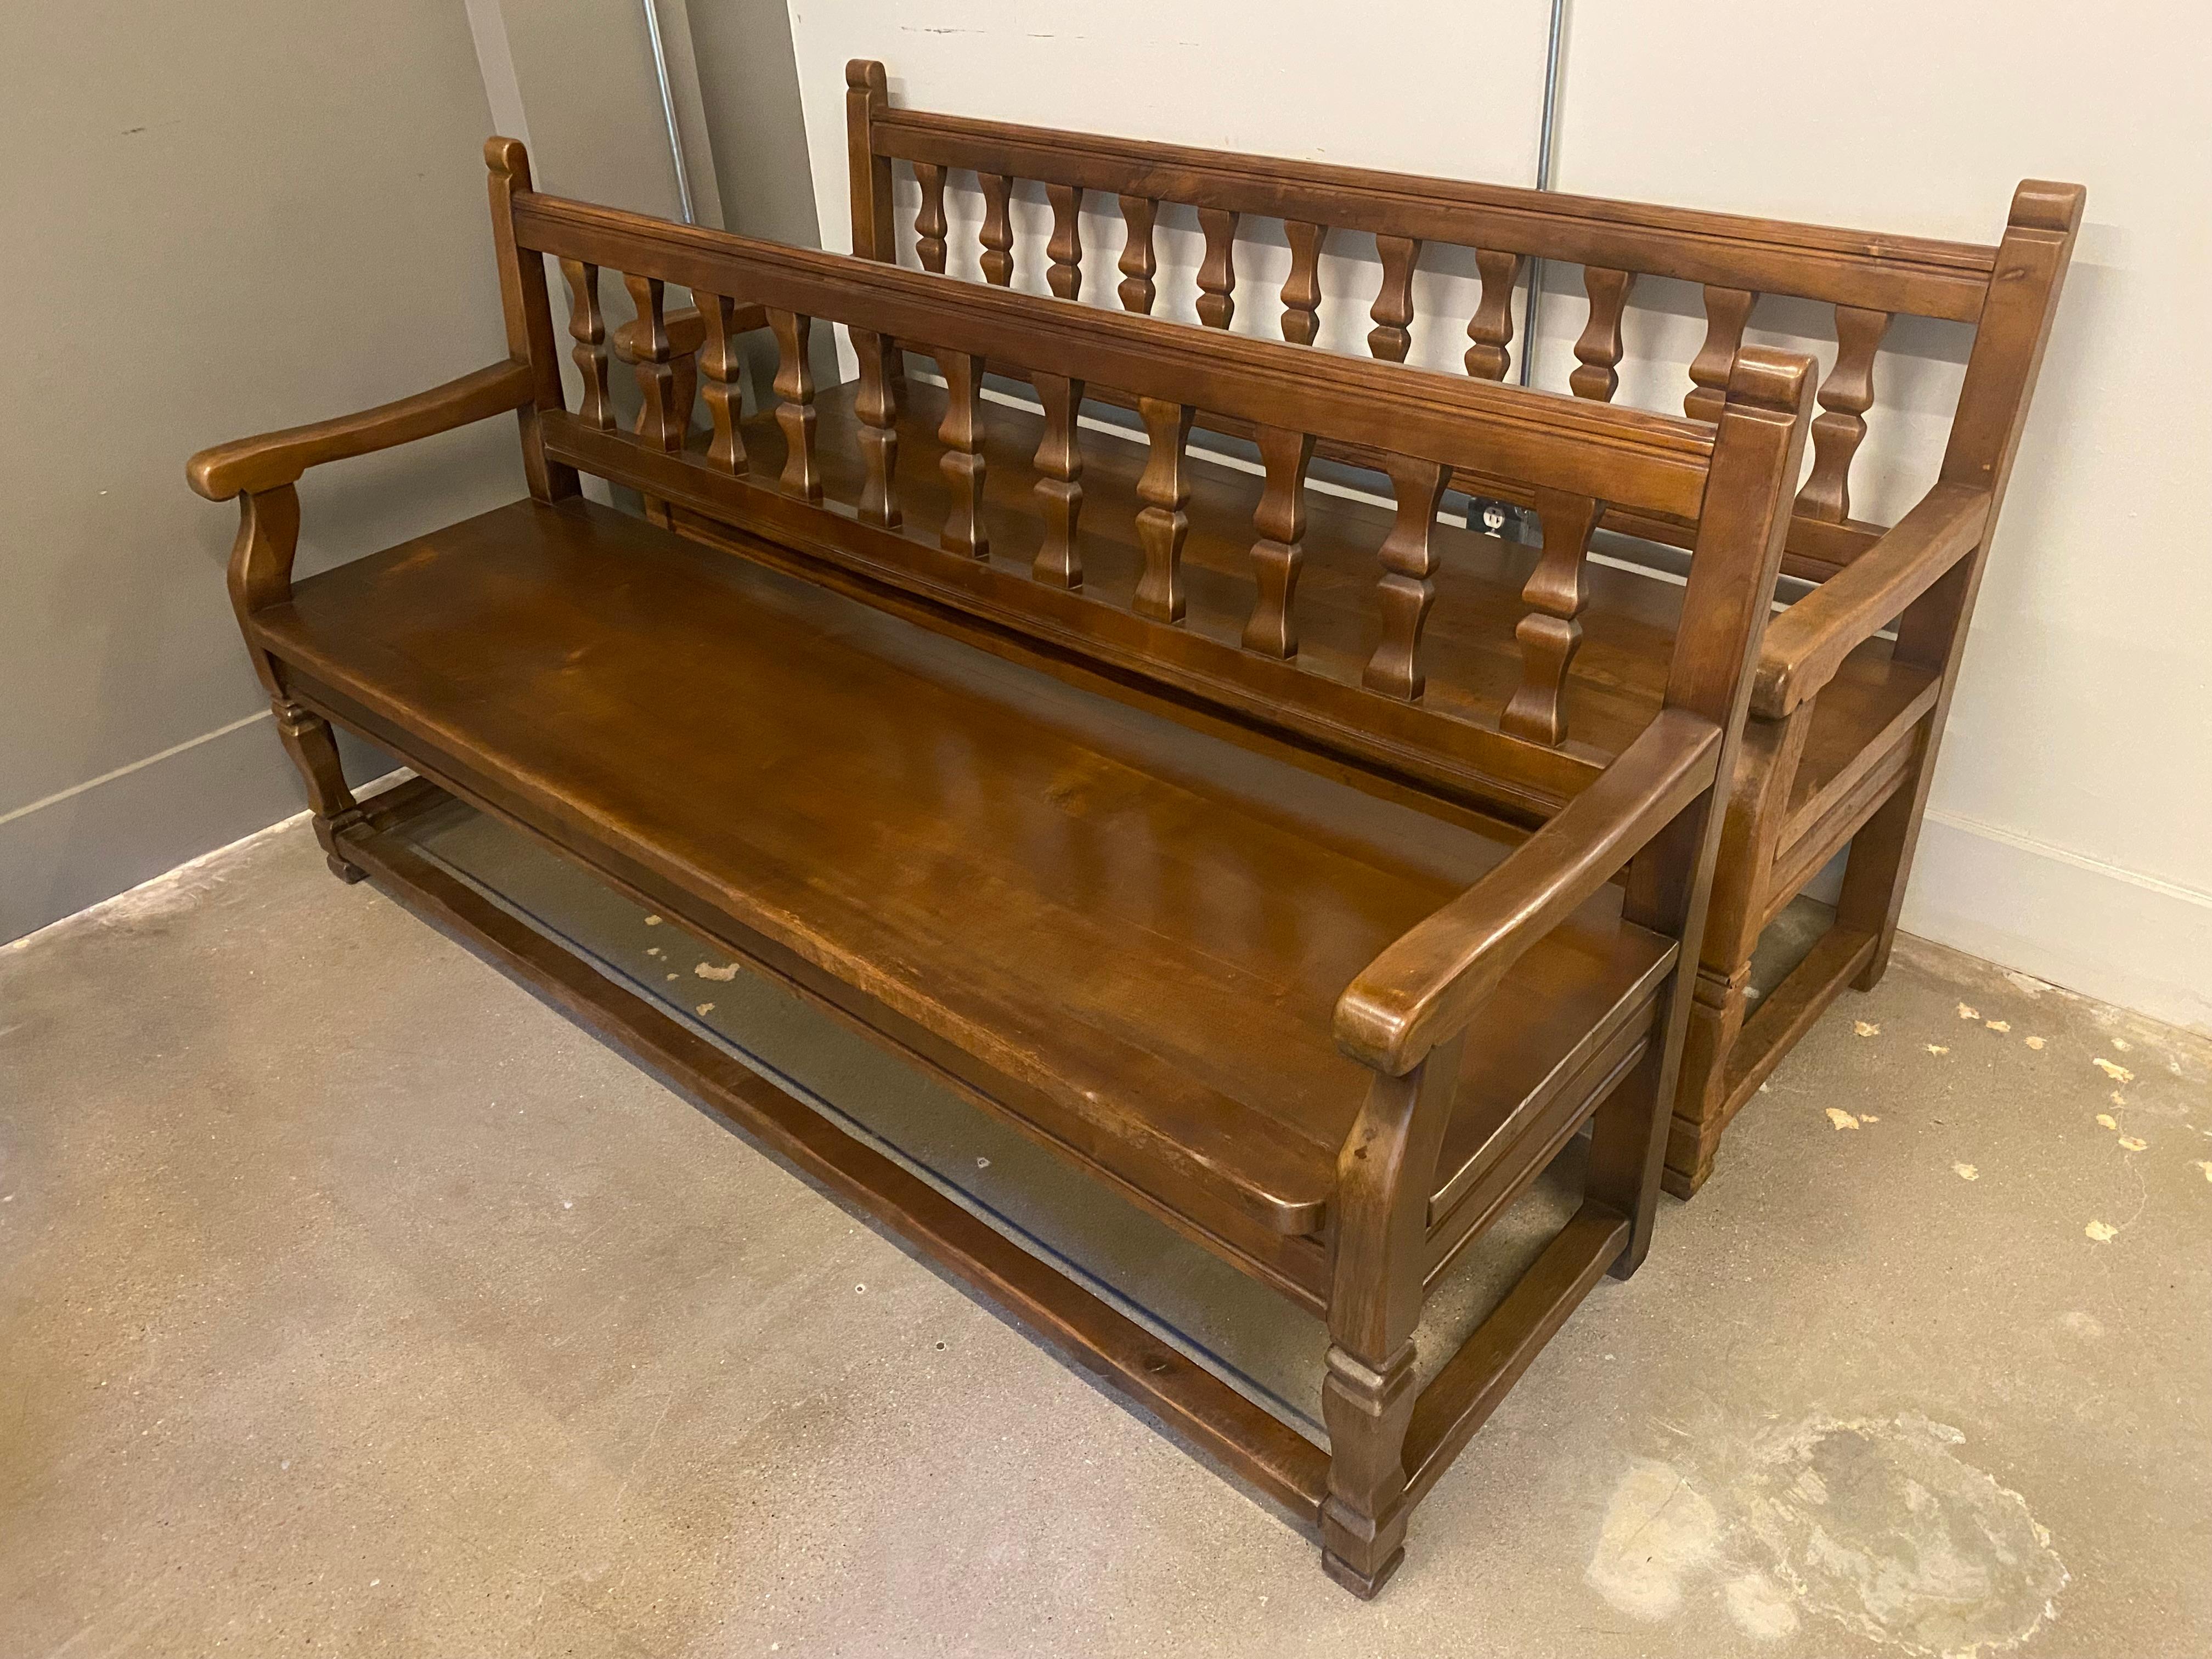 Solid walnut benches from Florence, Italy, 1840's. Nice proportions and well constructed. Recent coat of professionally applied paste wax for subtle luster to finish. Two available, sold separately.